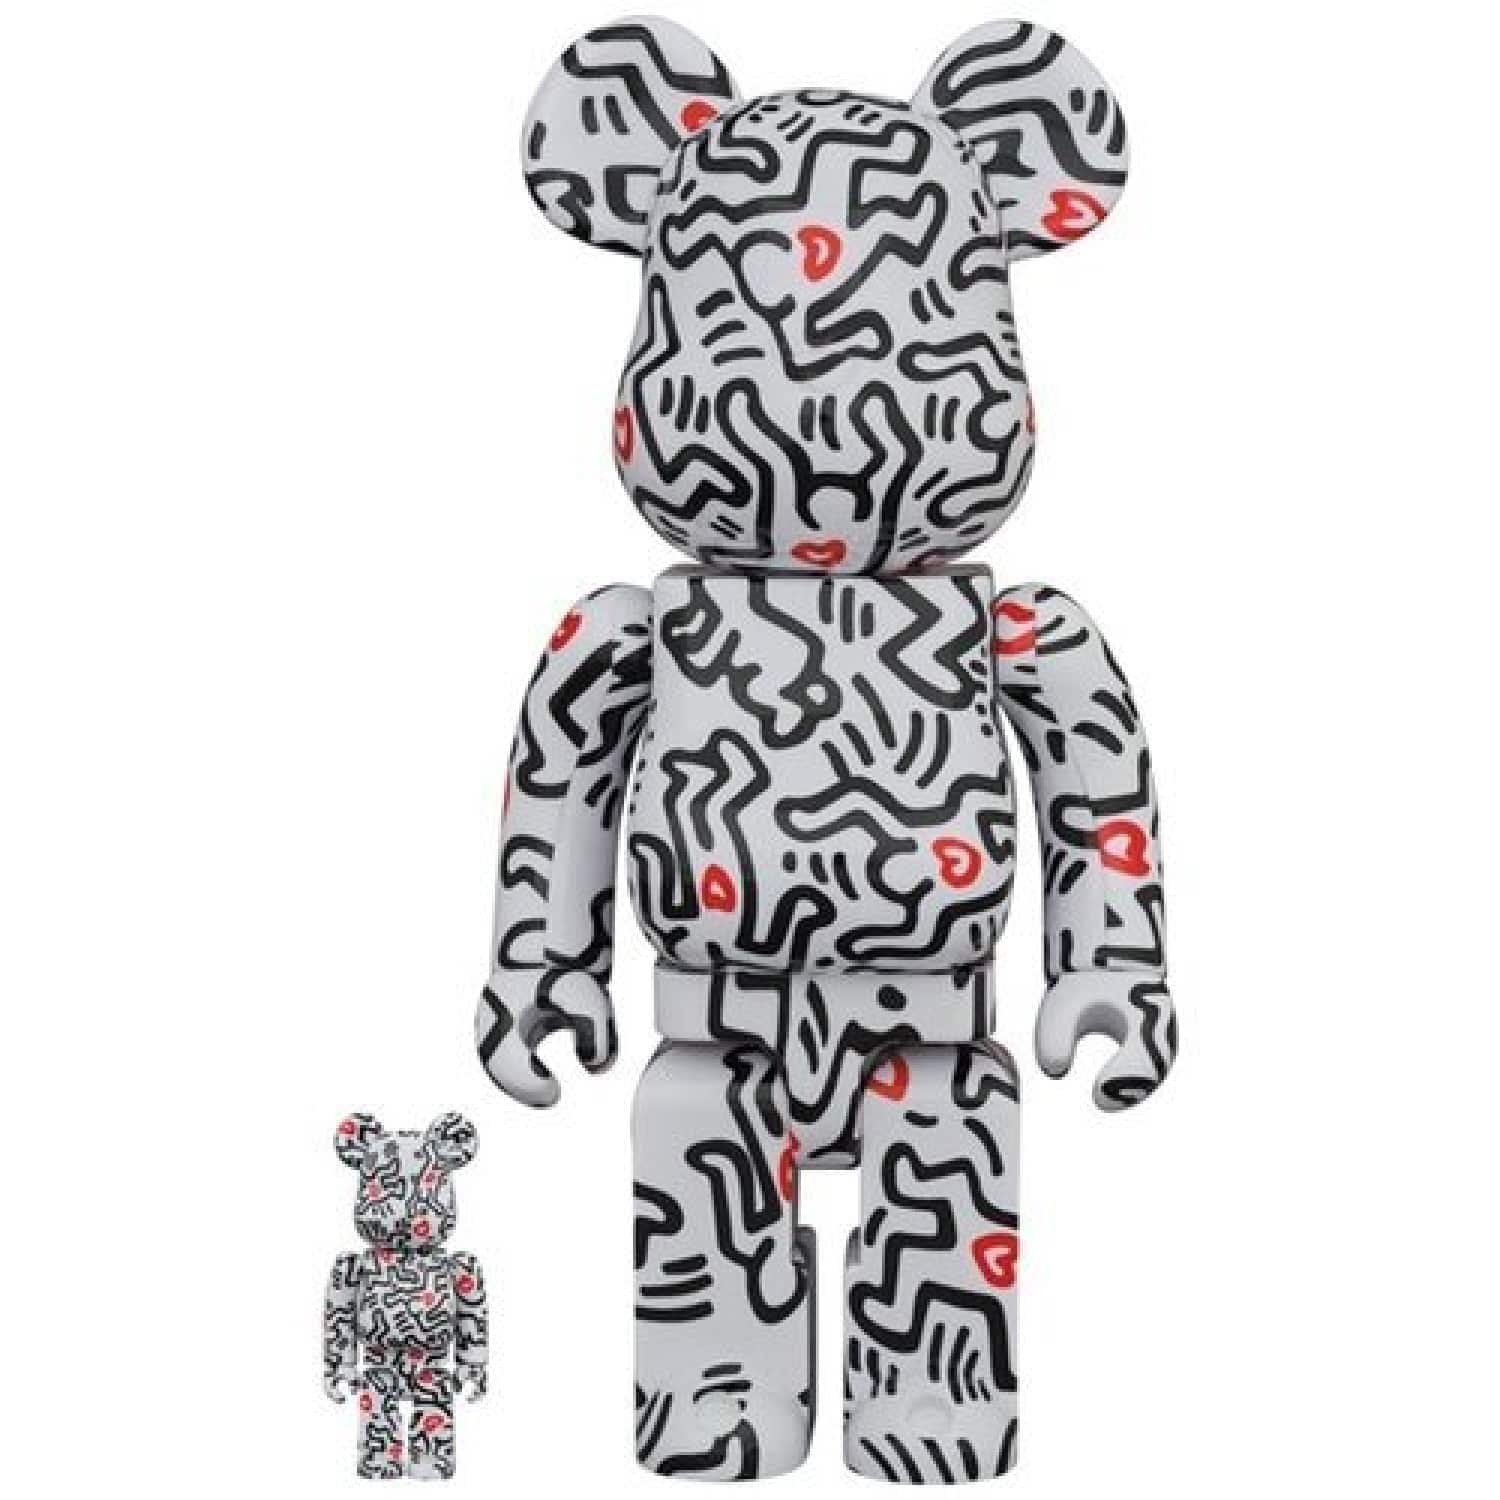 “Keith Haring V8” from Be@rbrick - Dope! Gallery